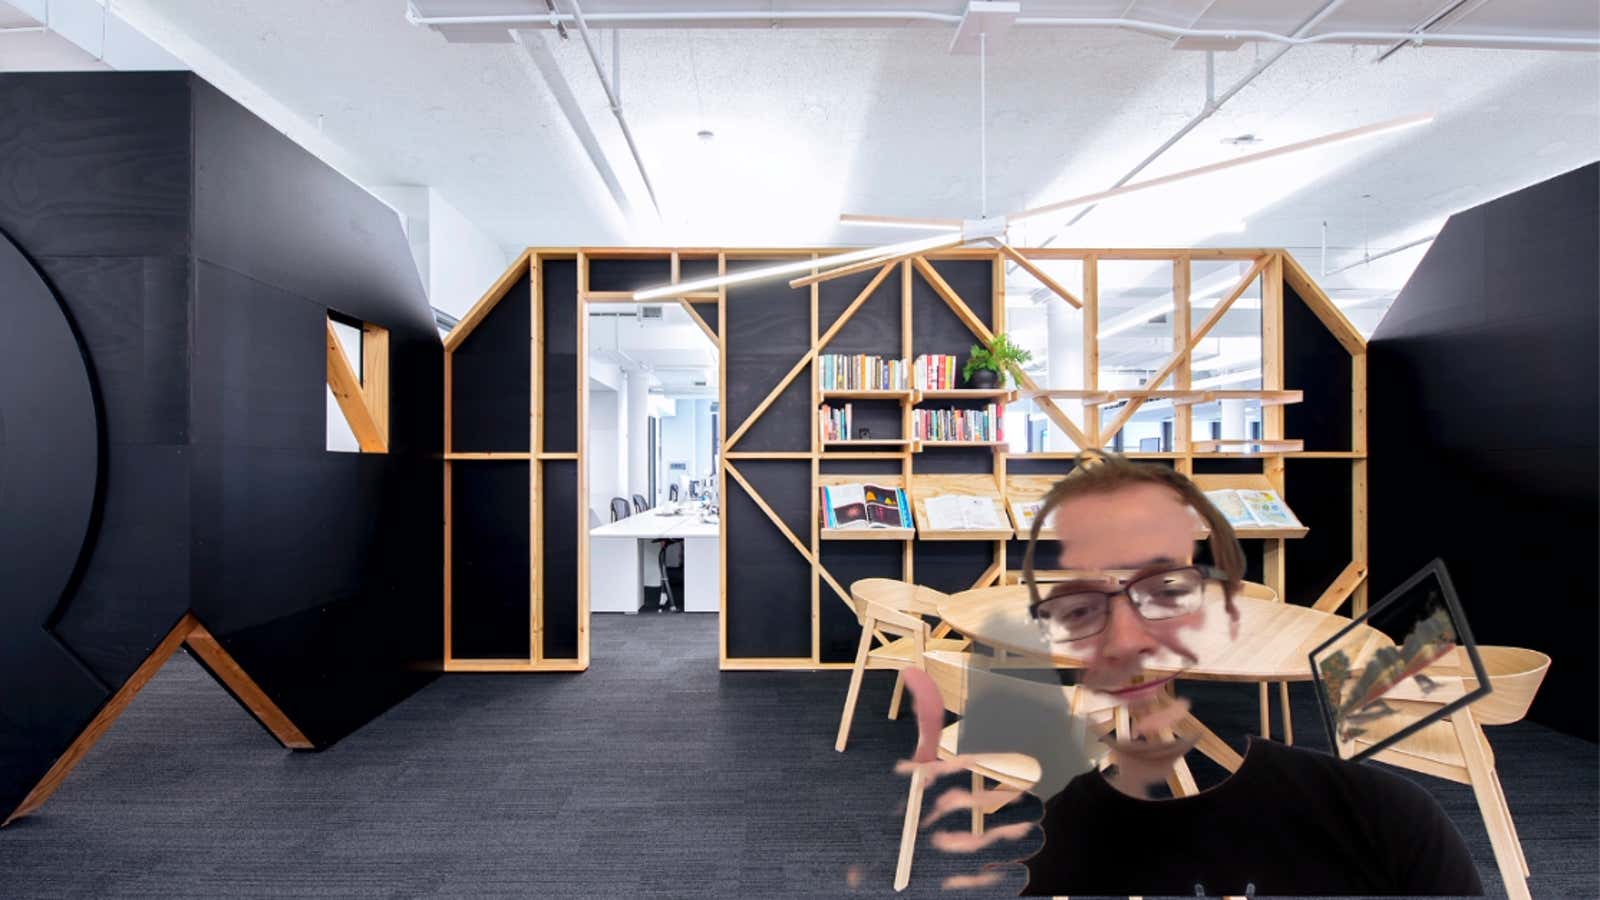 Can you tell if this photo is from a real office or a virtual office?